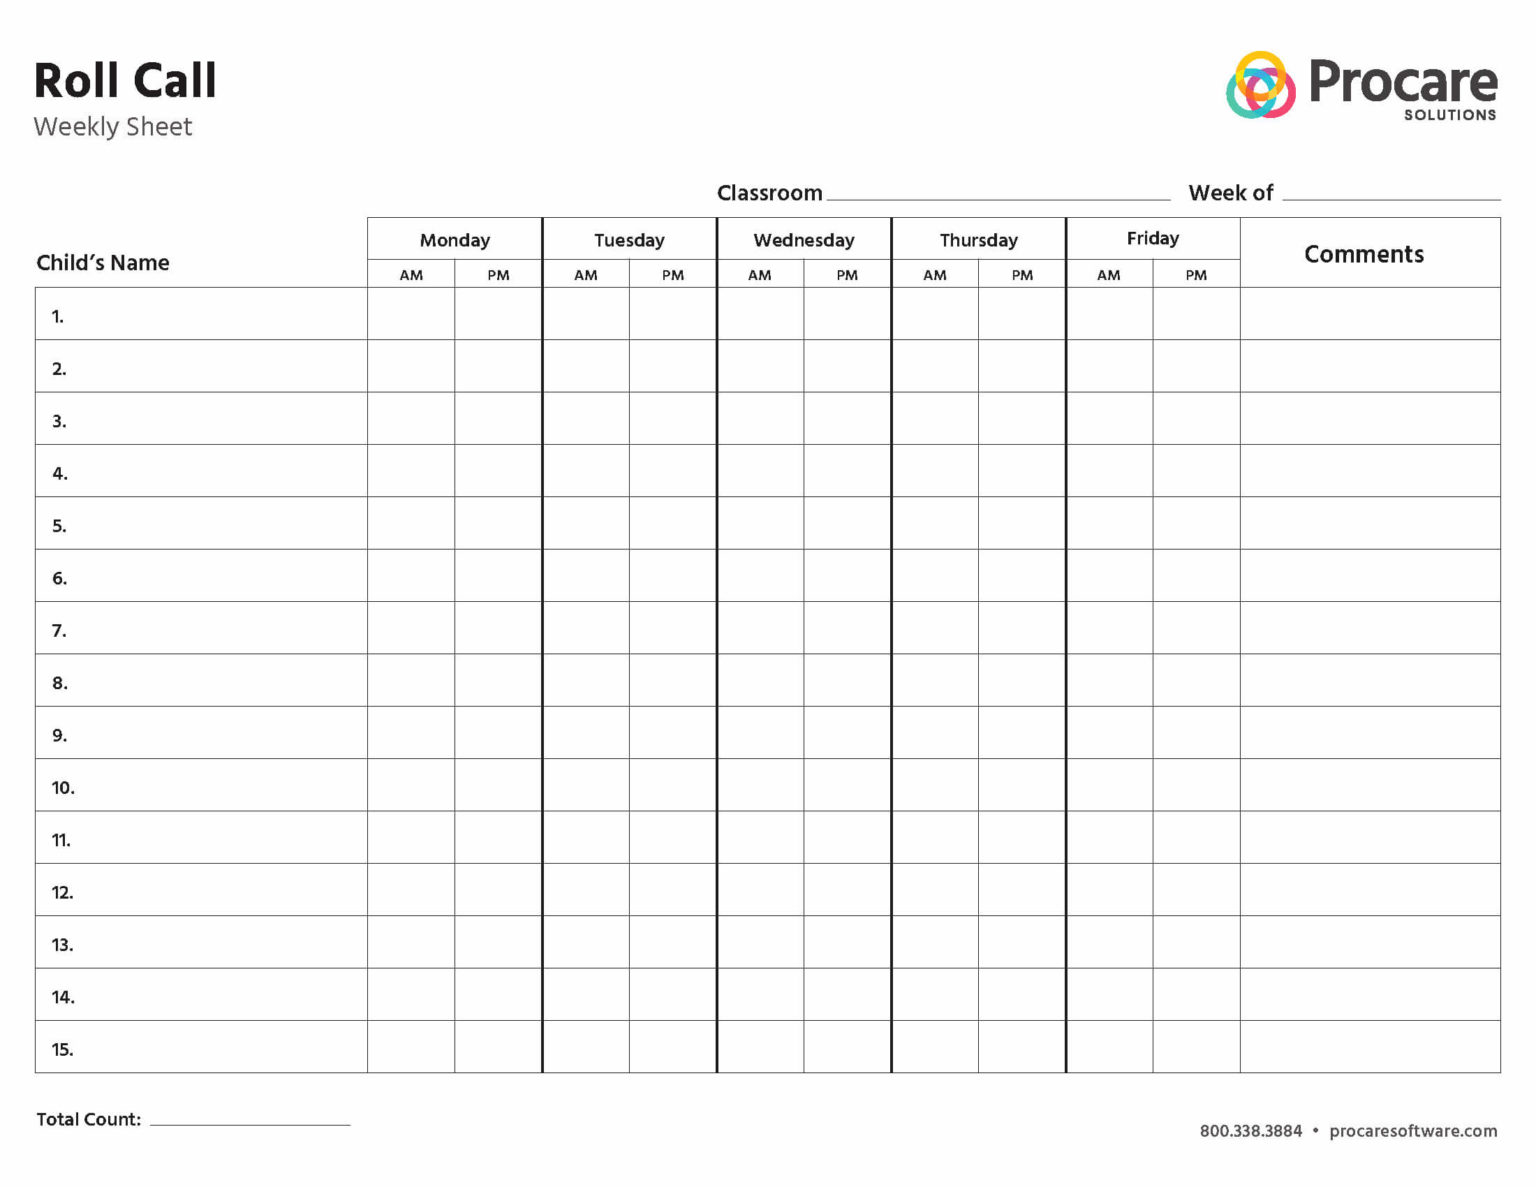 roll-call-attendance-sheets-procare-solutions